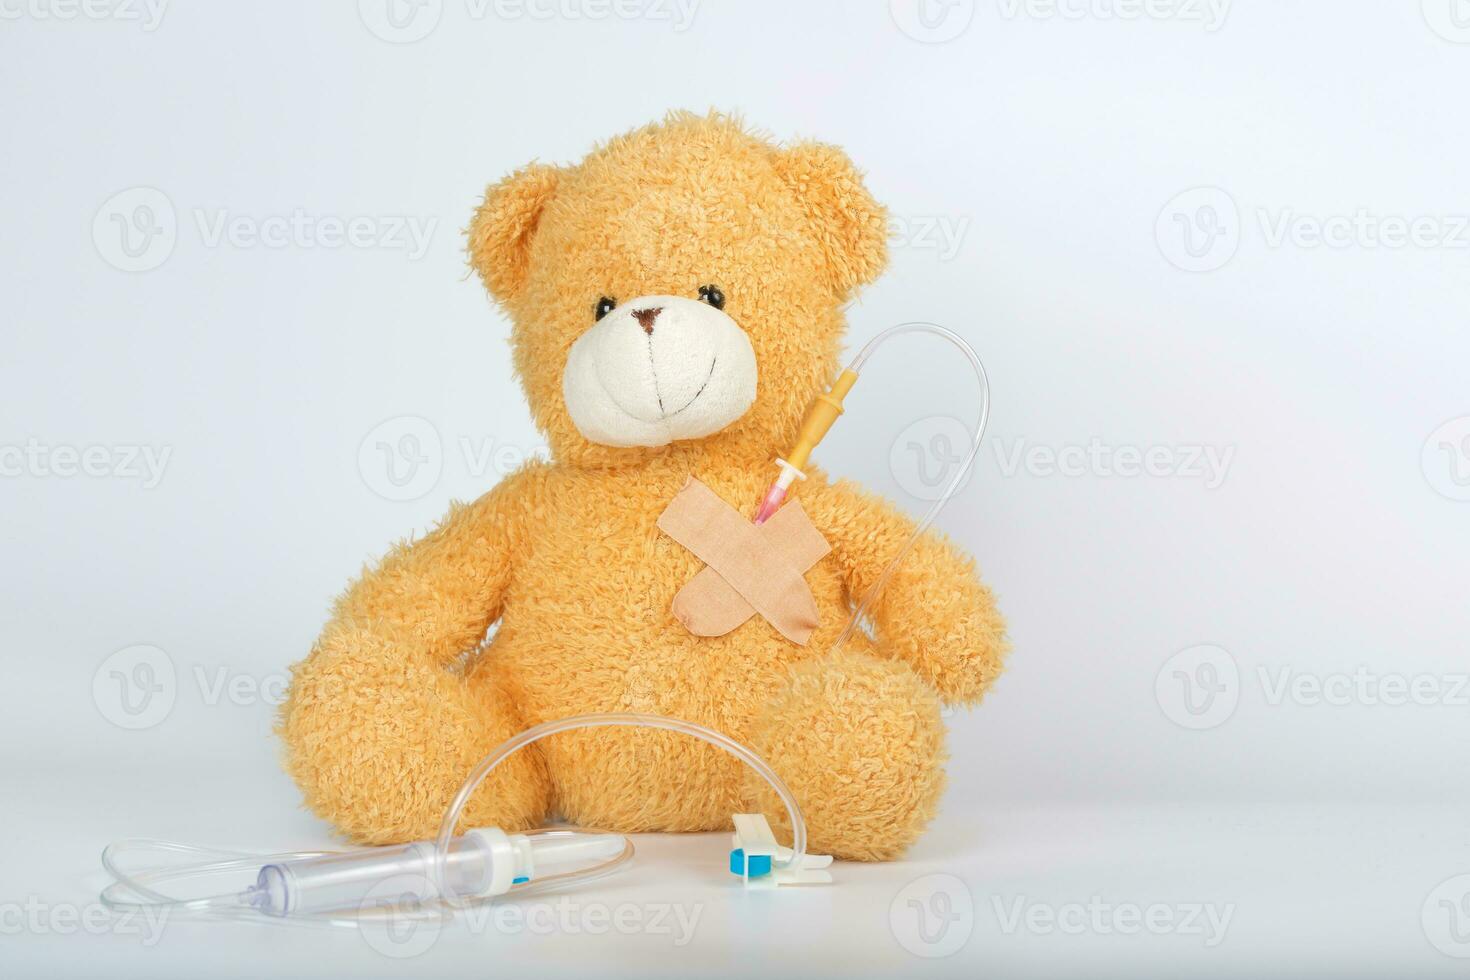 Teddy bear with blood transfusion system. Closeup photo